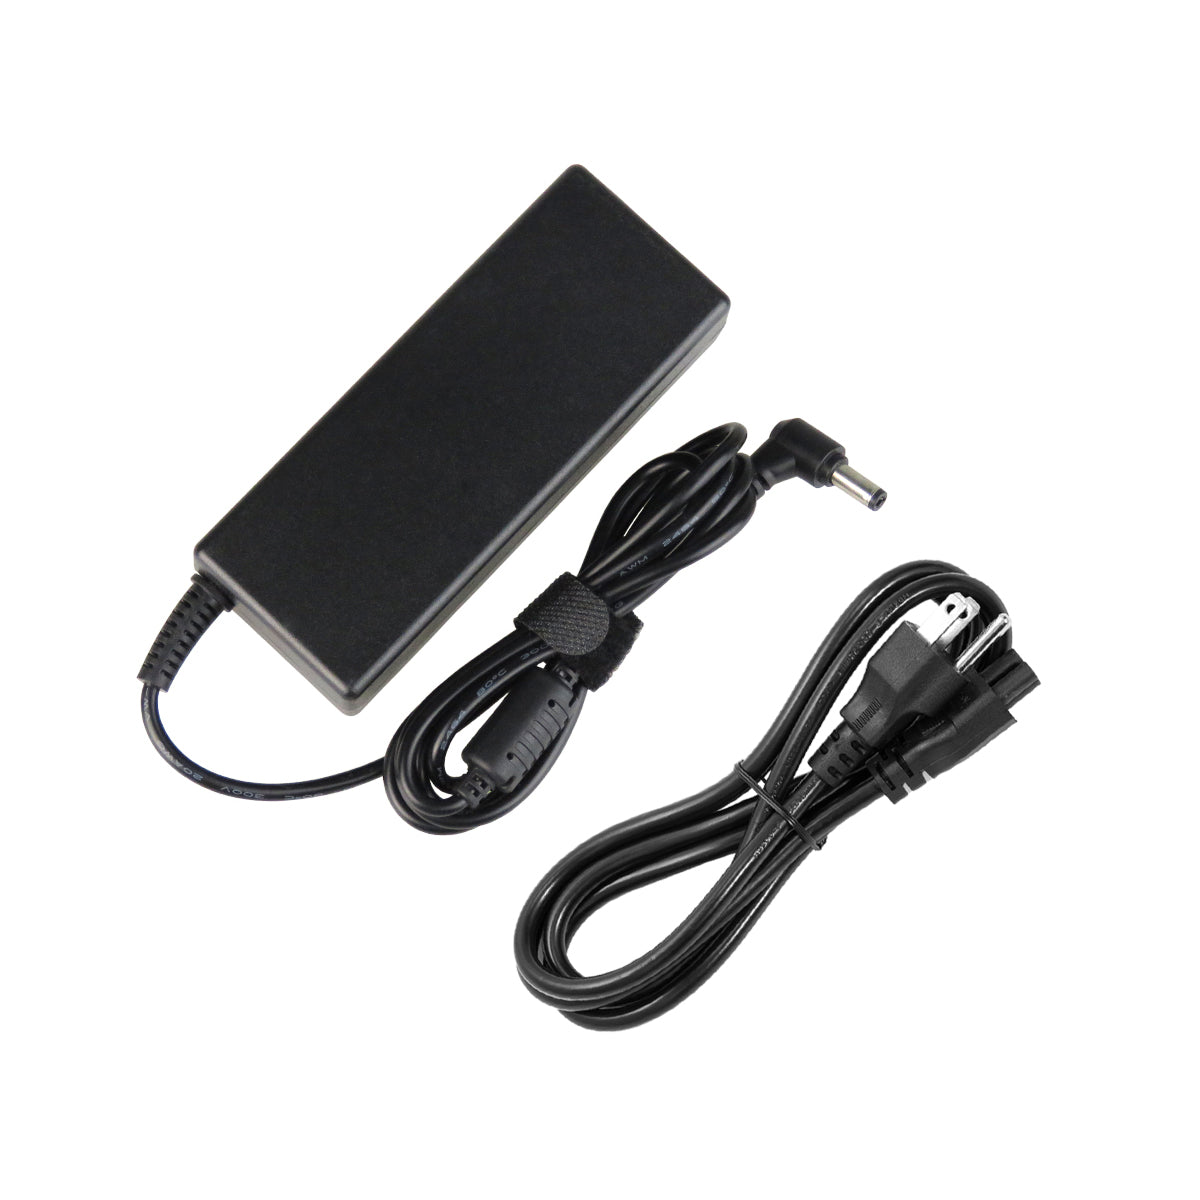 AC Adapter Charger for ASUS A83SM Laptop.